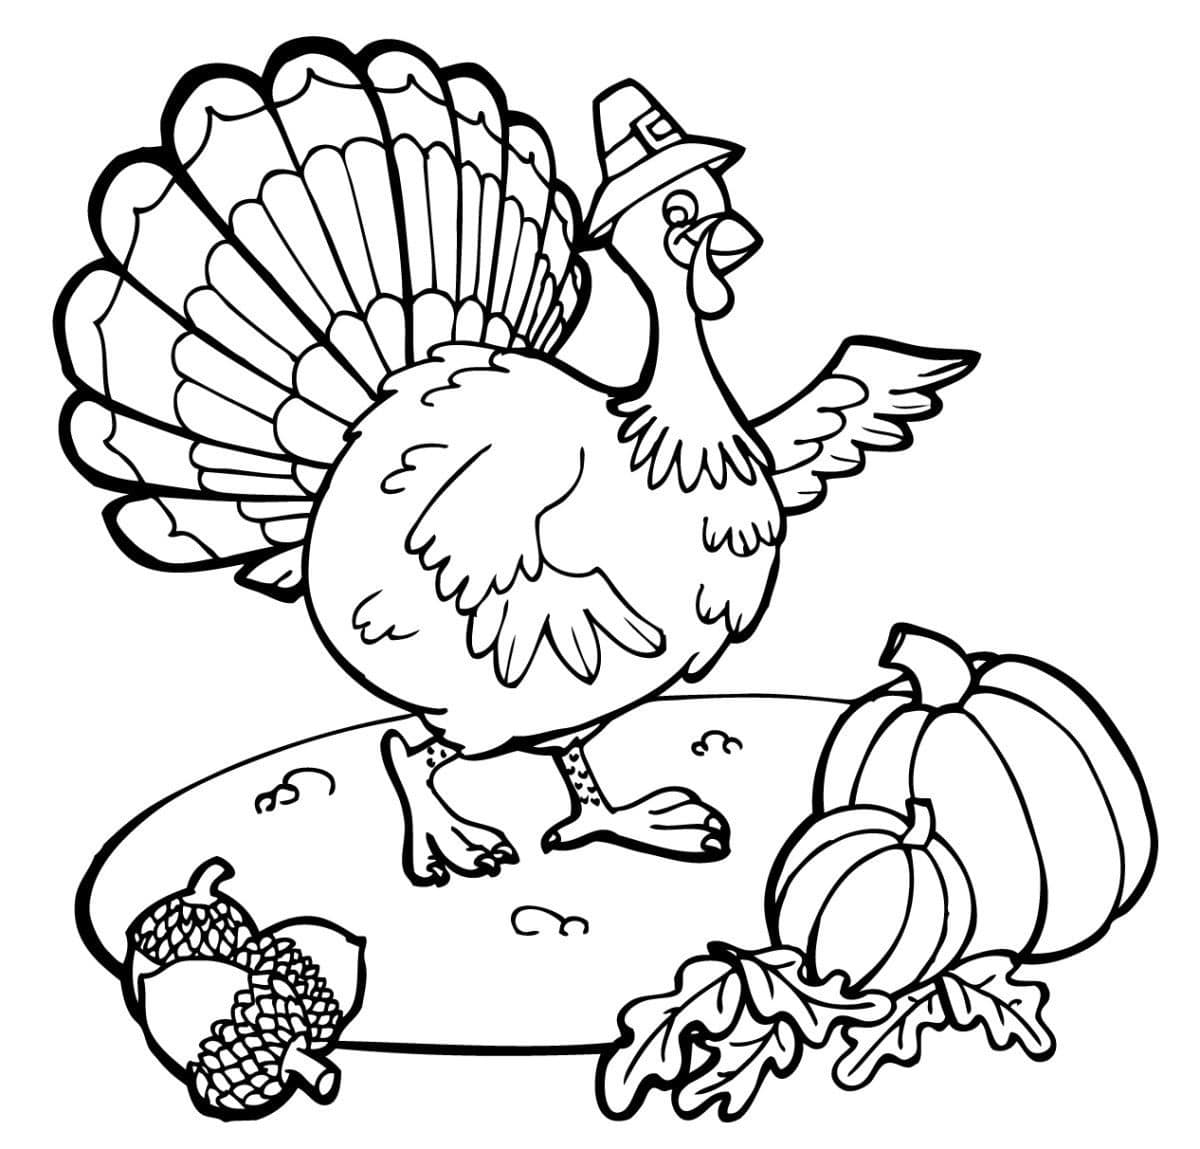 30-free-thanksgiving-coloring-pages-for-adults-kids